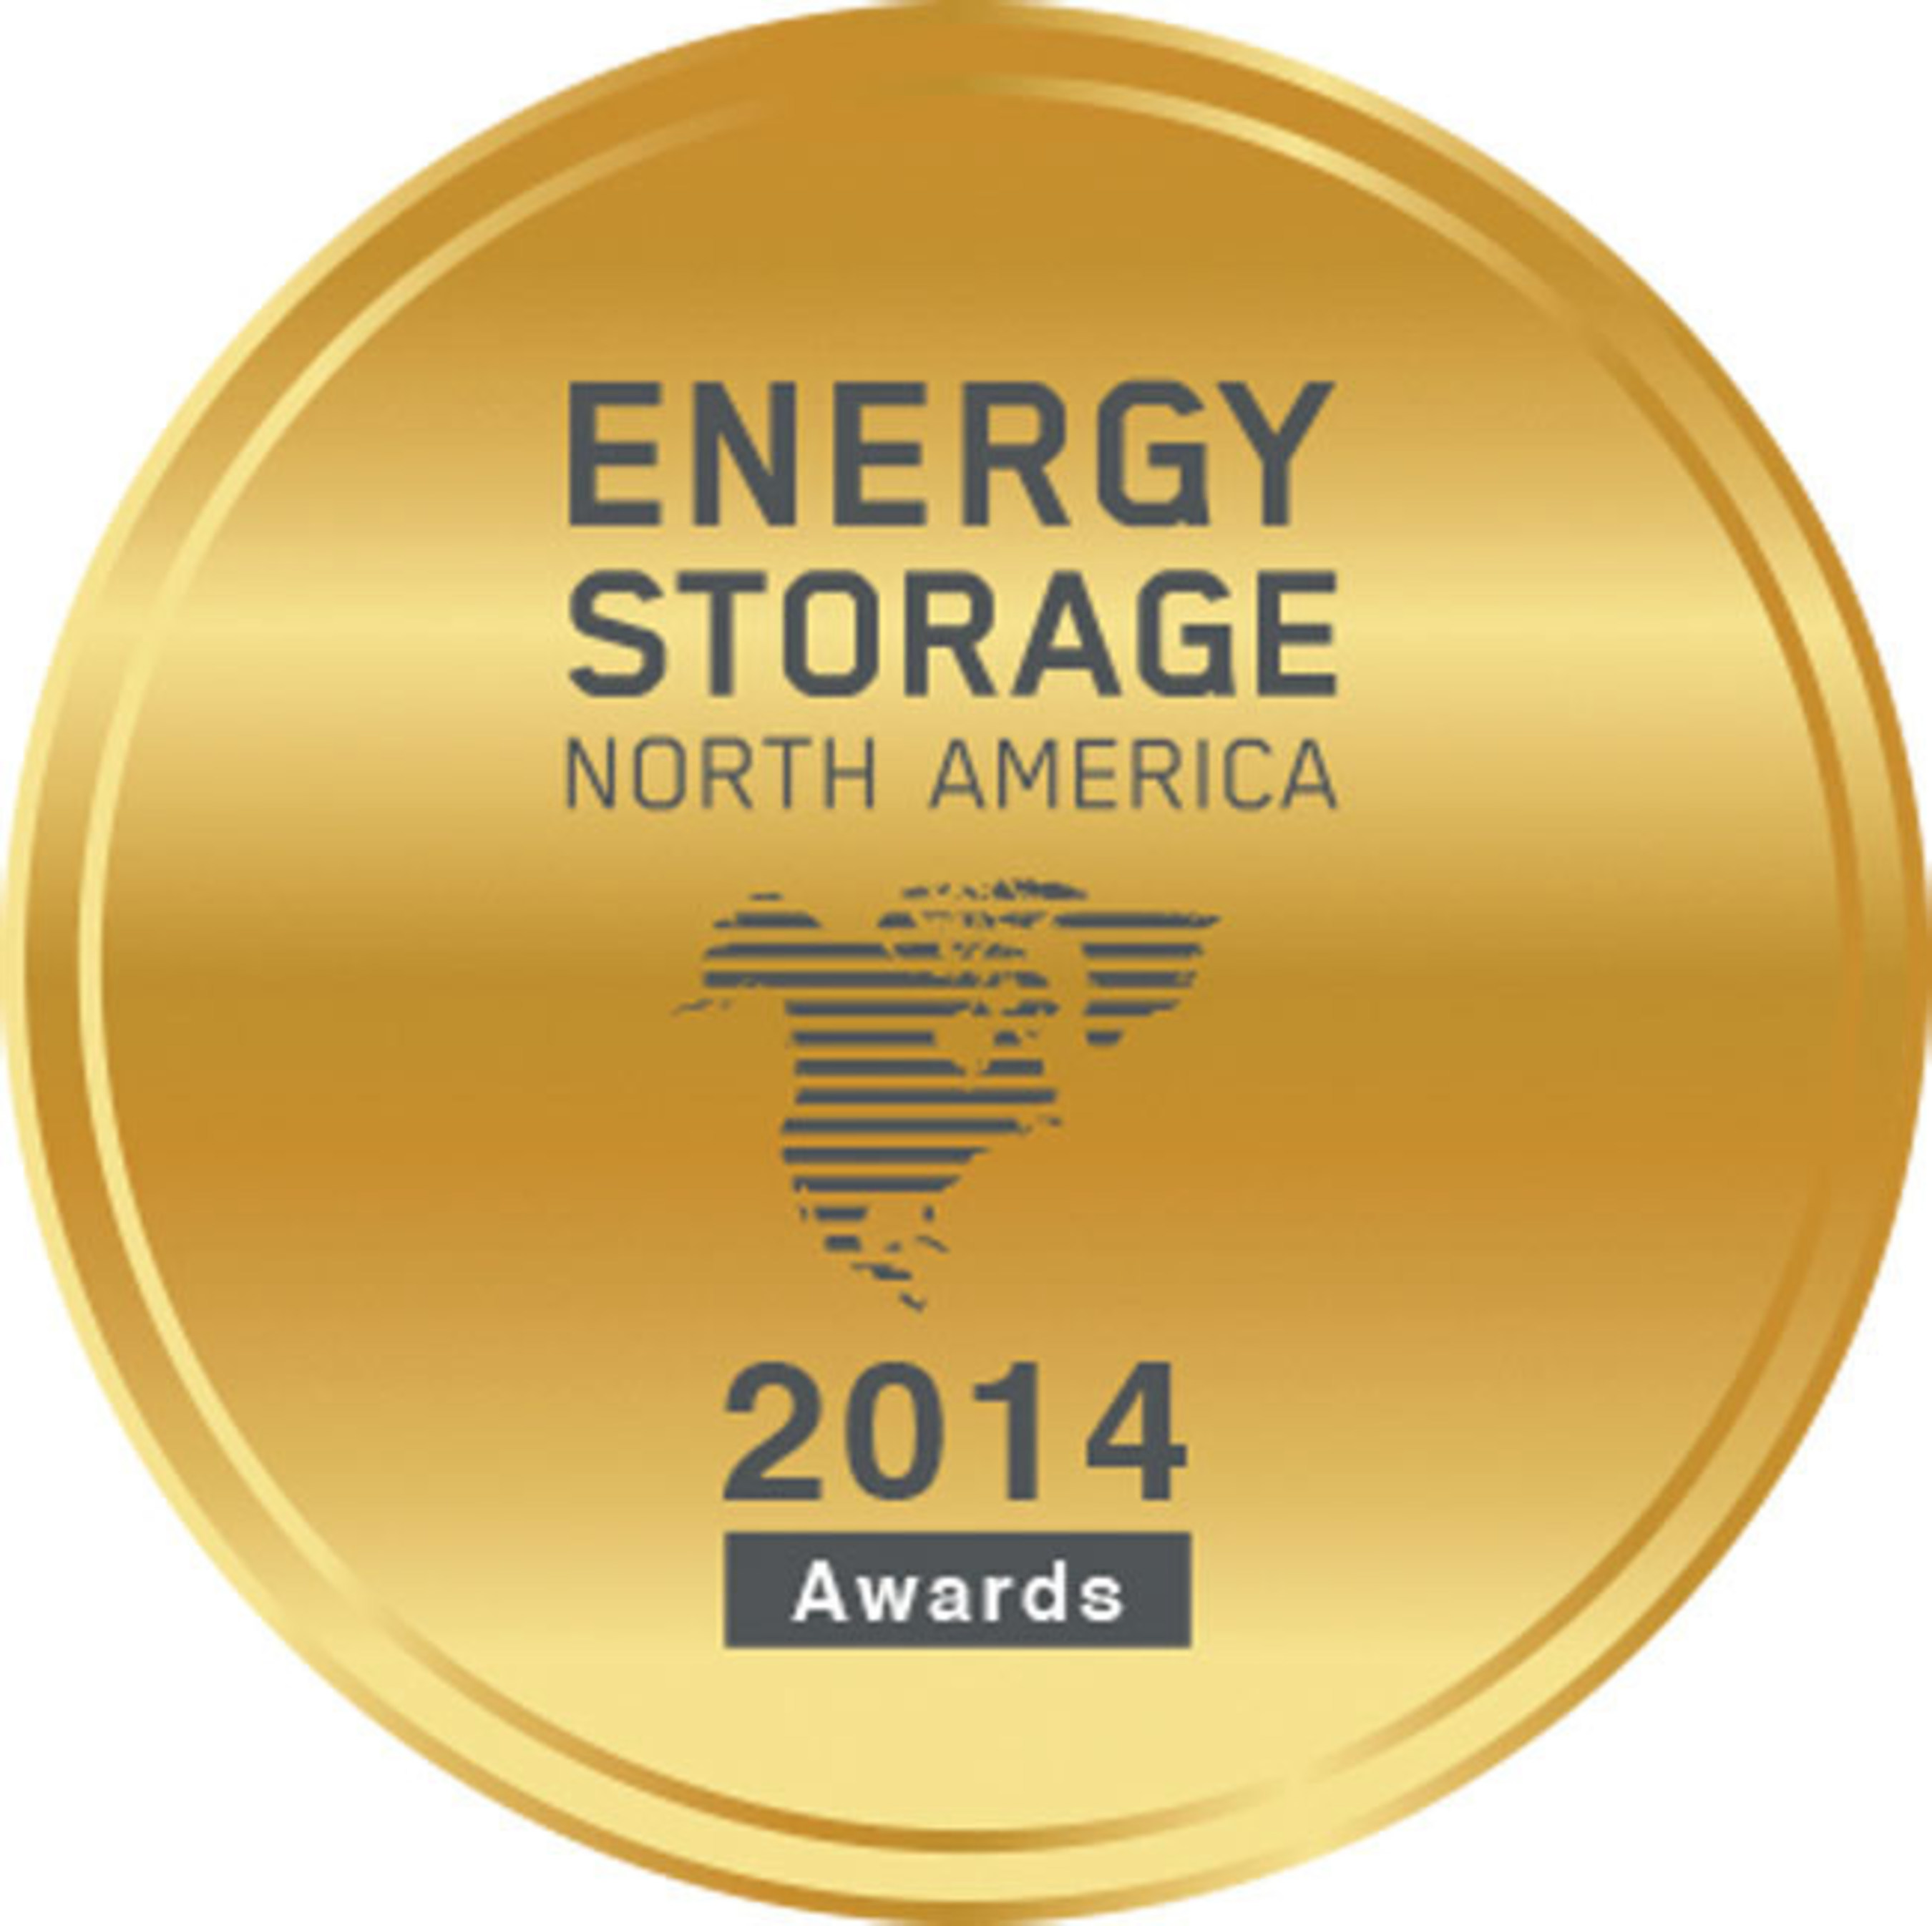 Energy Storage North America Innovation Awards feature game-changing energy storage projects deployed throughout North America, providing a diverse new tool kit for addressing today’s grid challenges. (PRNewsFoto/Energy Storage North America)